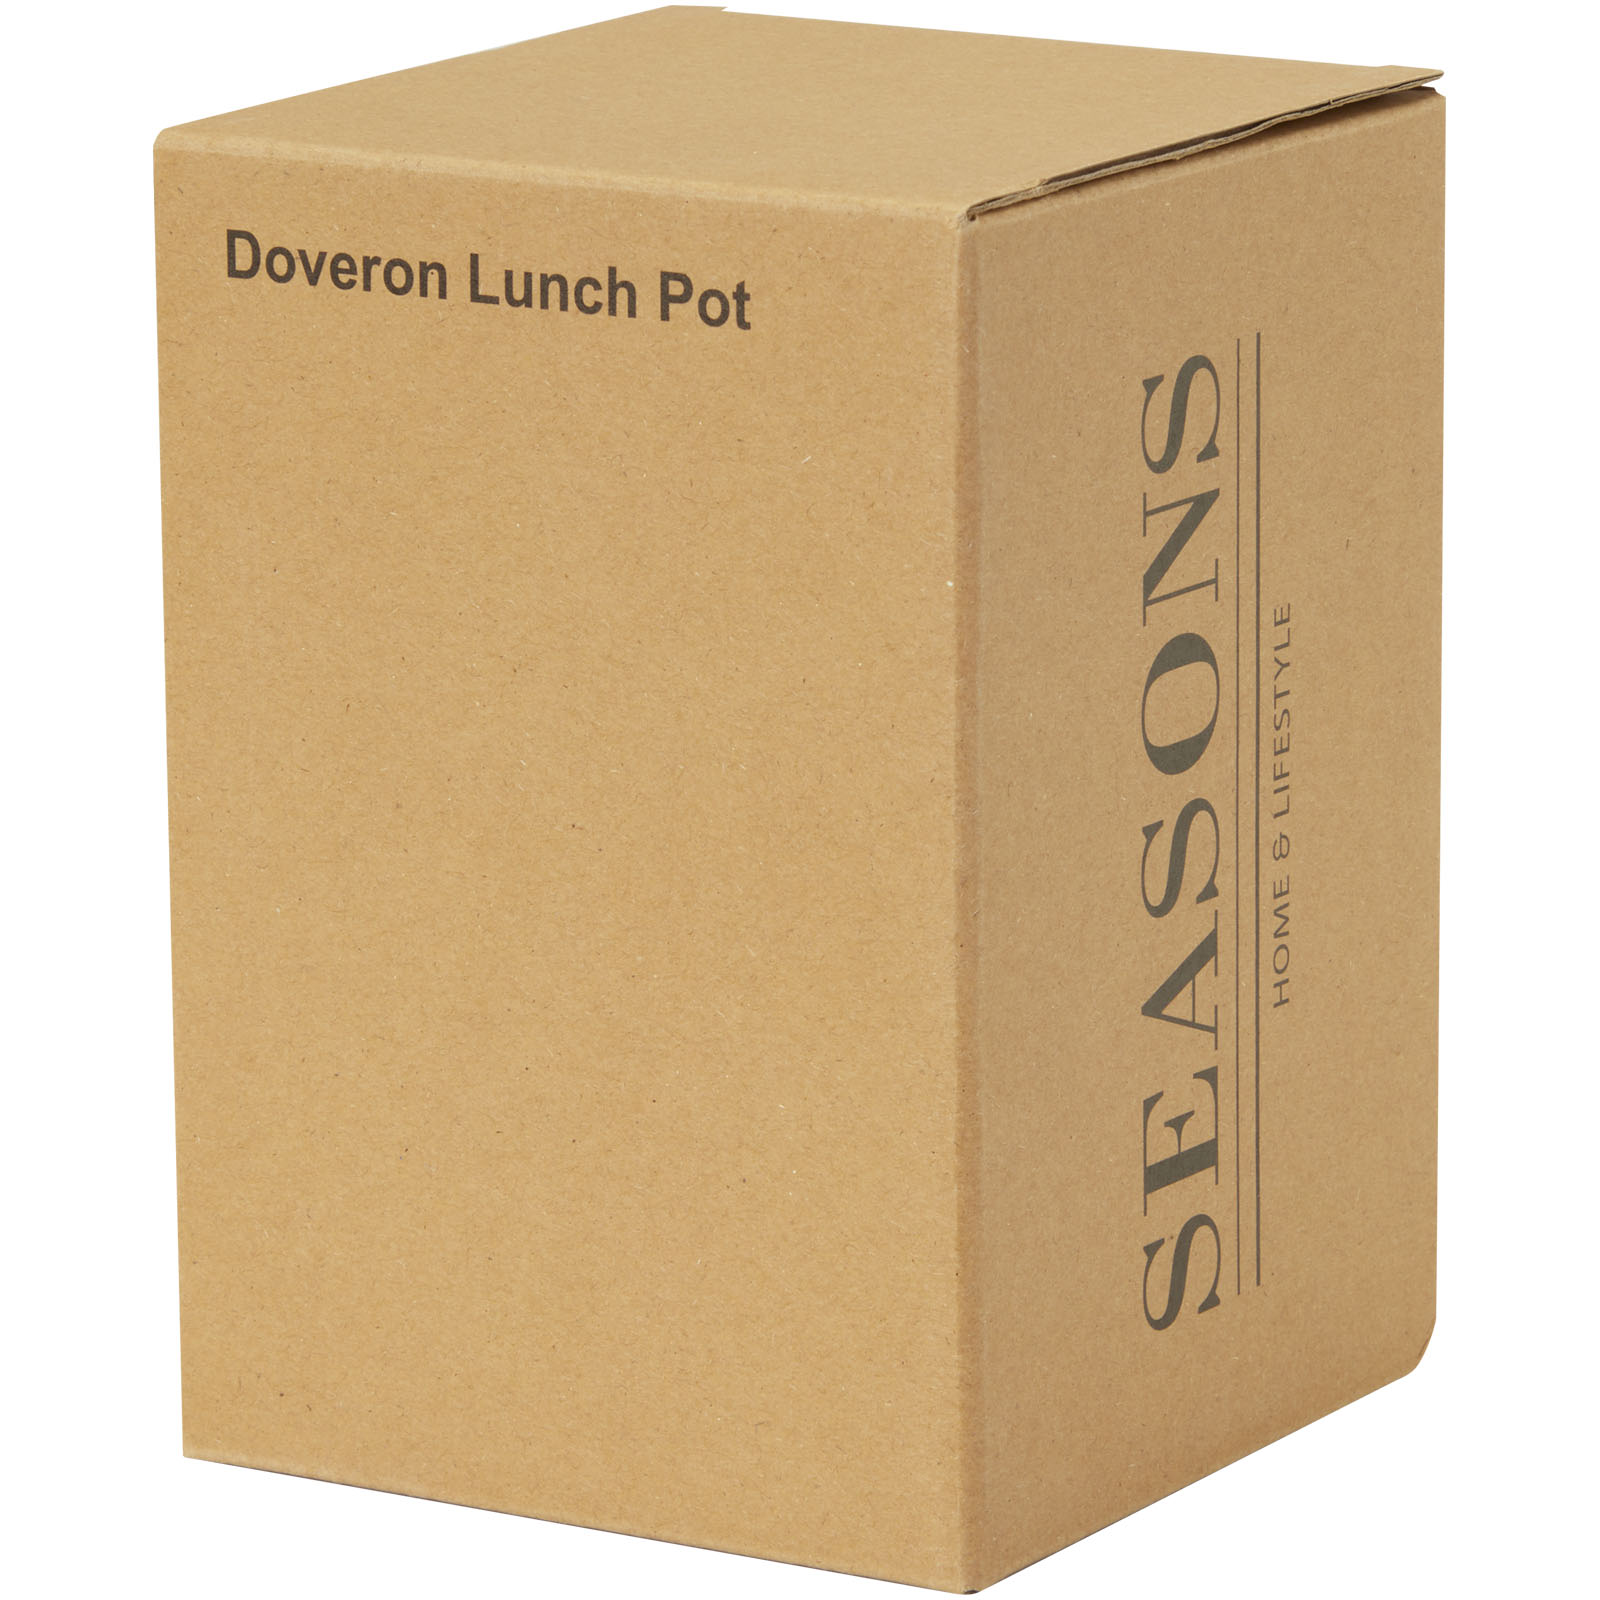 Advertising Lunch Boxes - Doveron 500 ml recycled stainless steel insulated lunch pot - 1